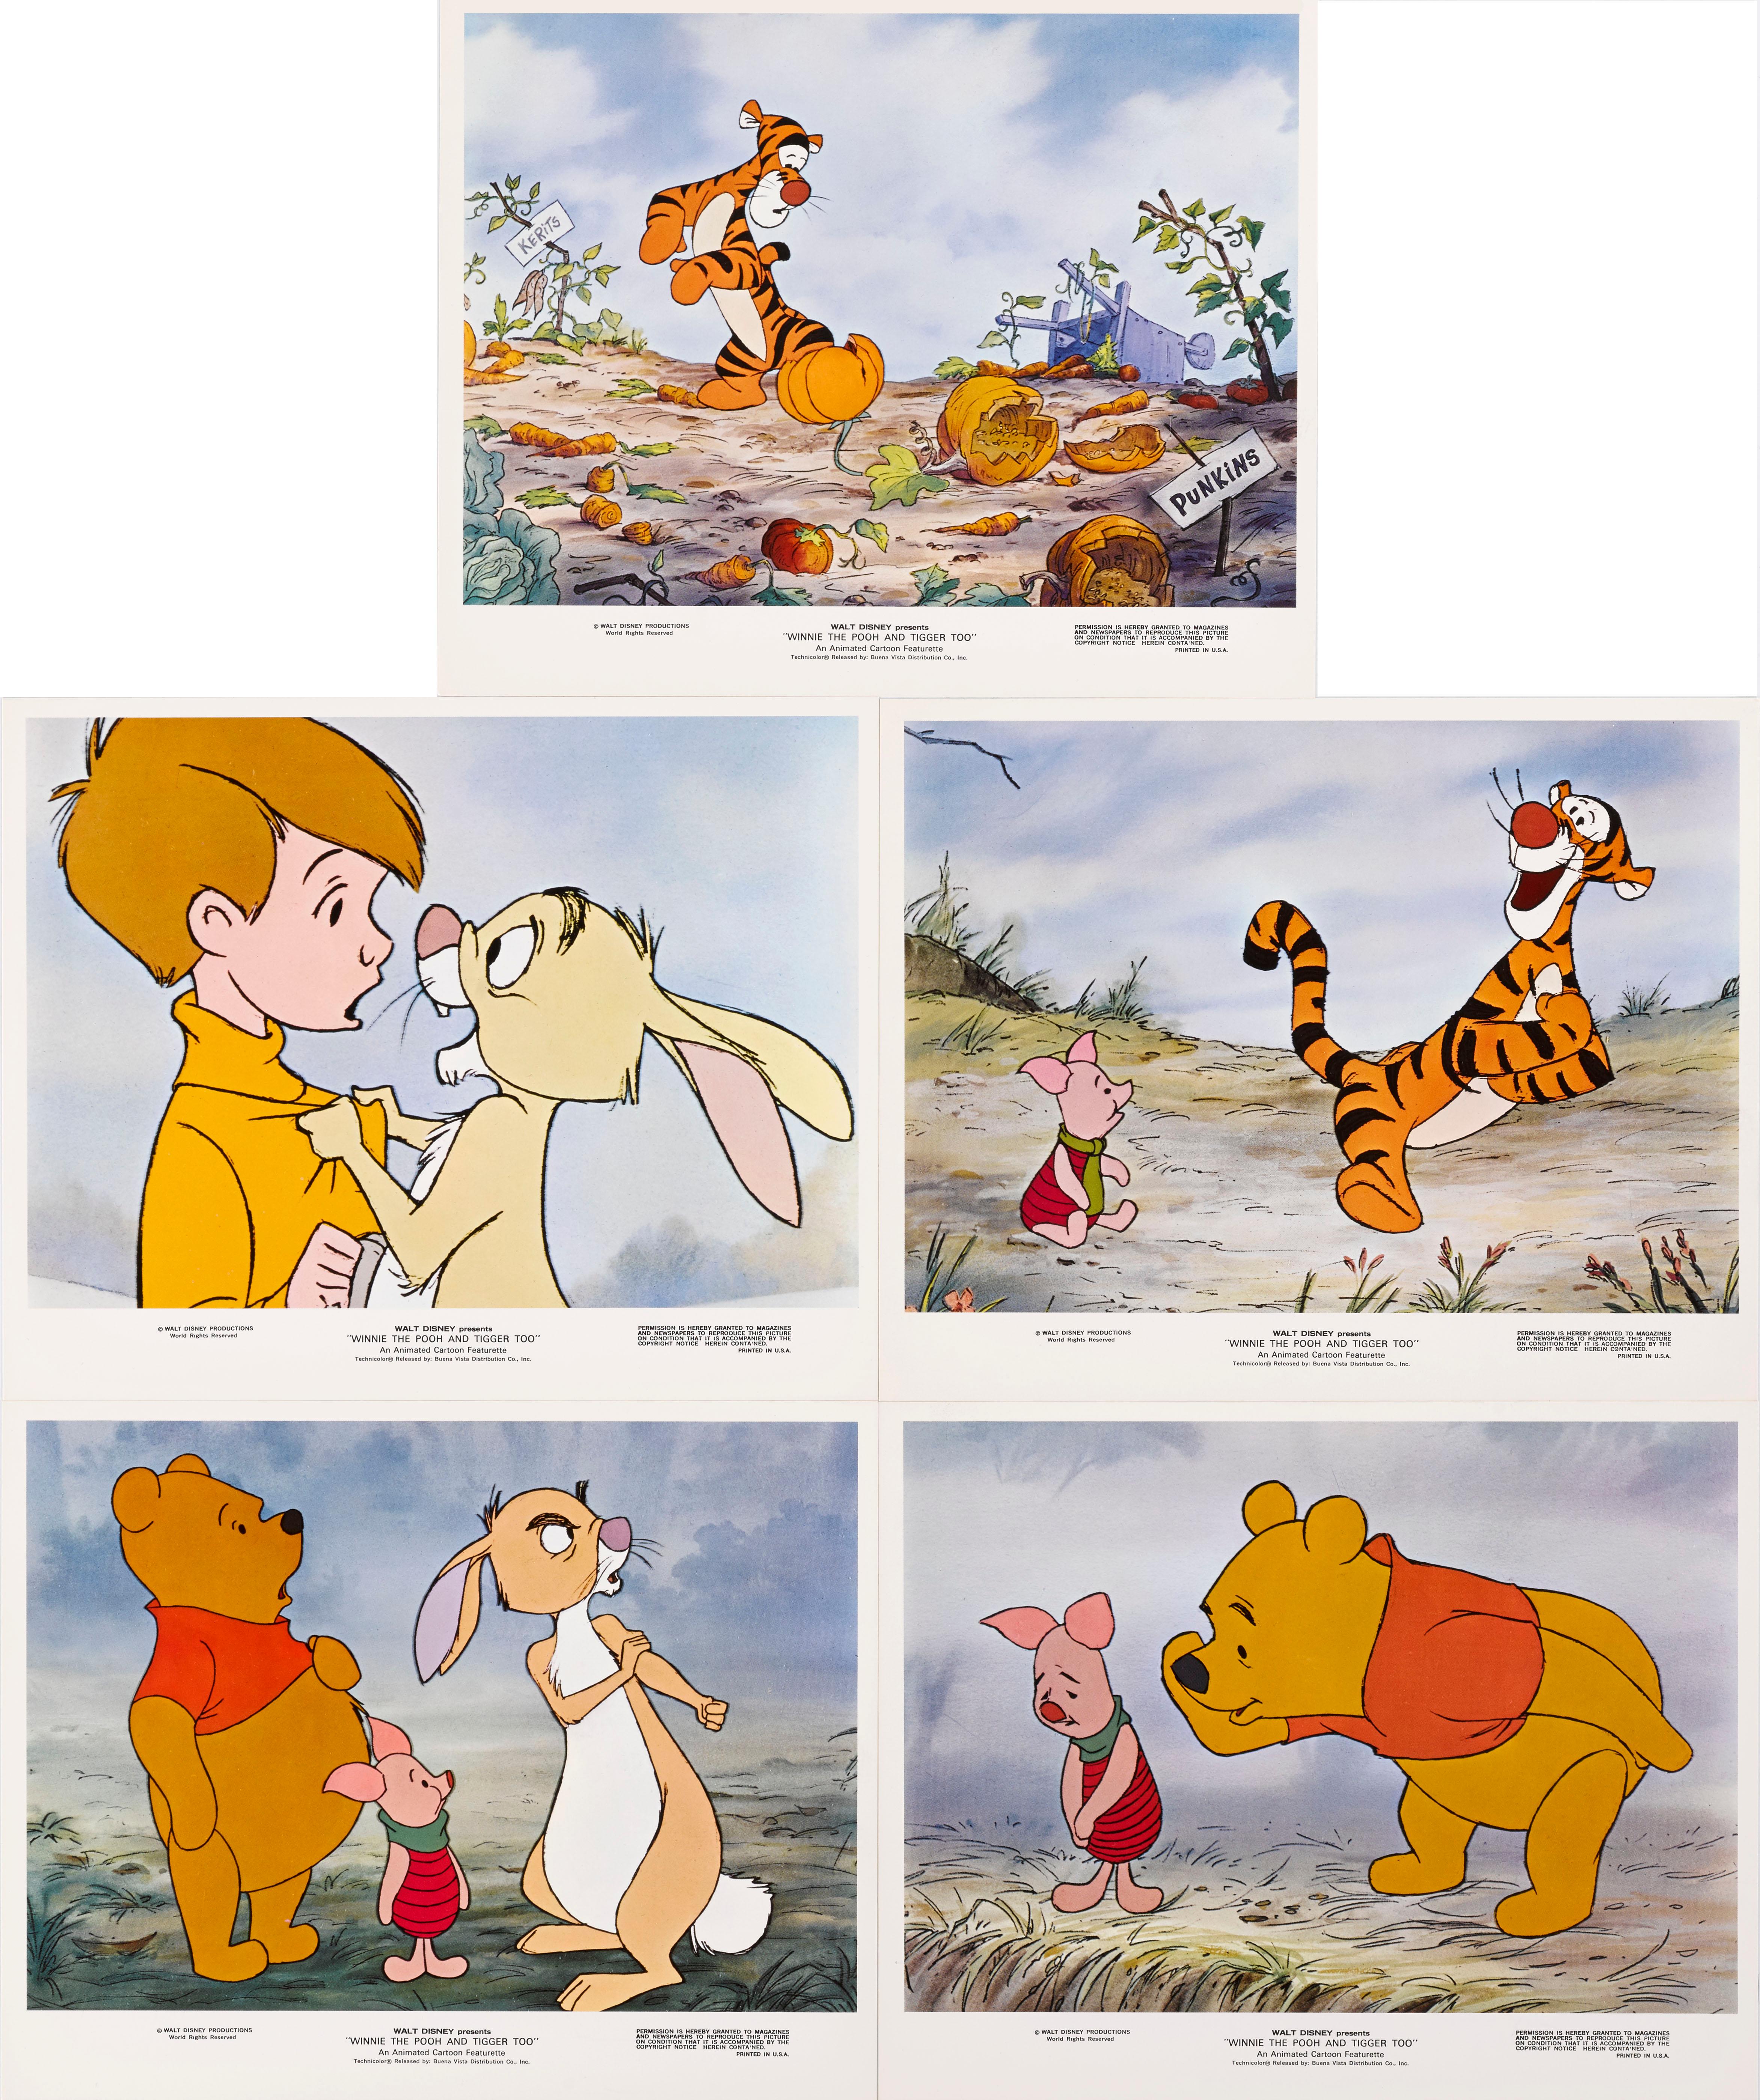 Original set of five color production stills from the 1974 Disney animation.
   